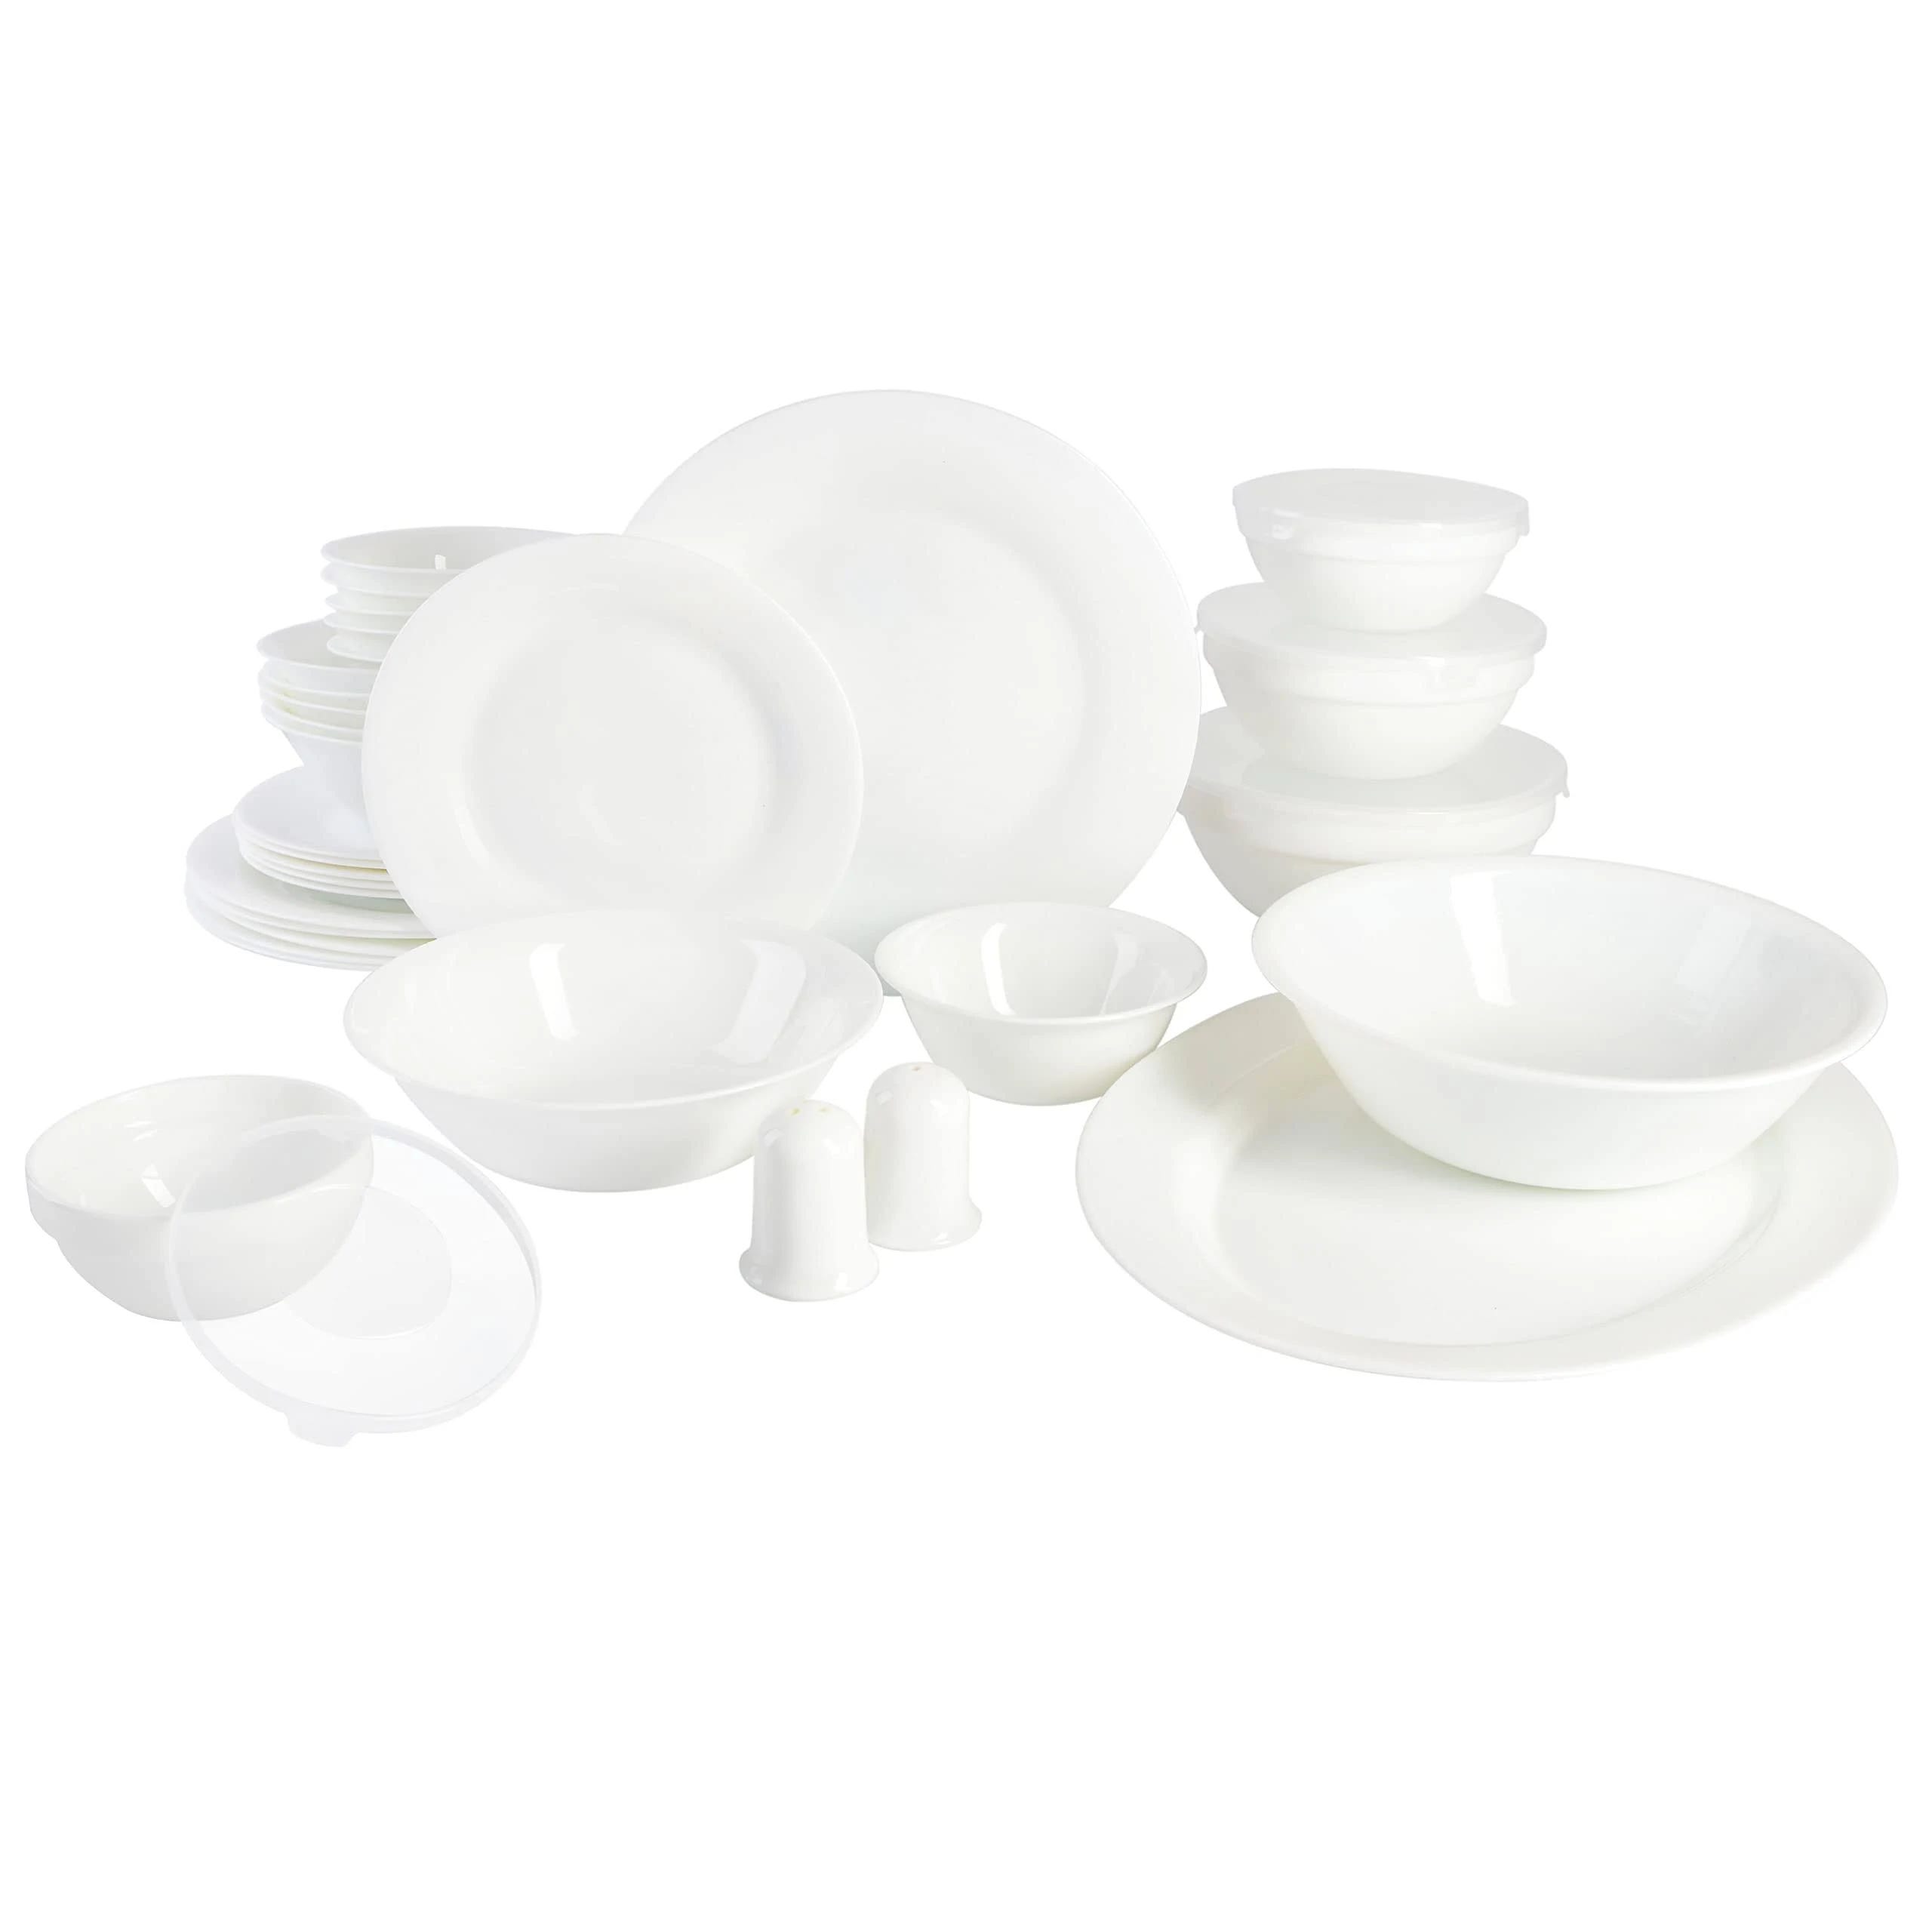 Sleek 36-Piece Tempered Opal Glass Dinnerware Set - Perfect for Everyday Living | Image